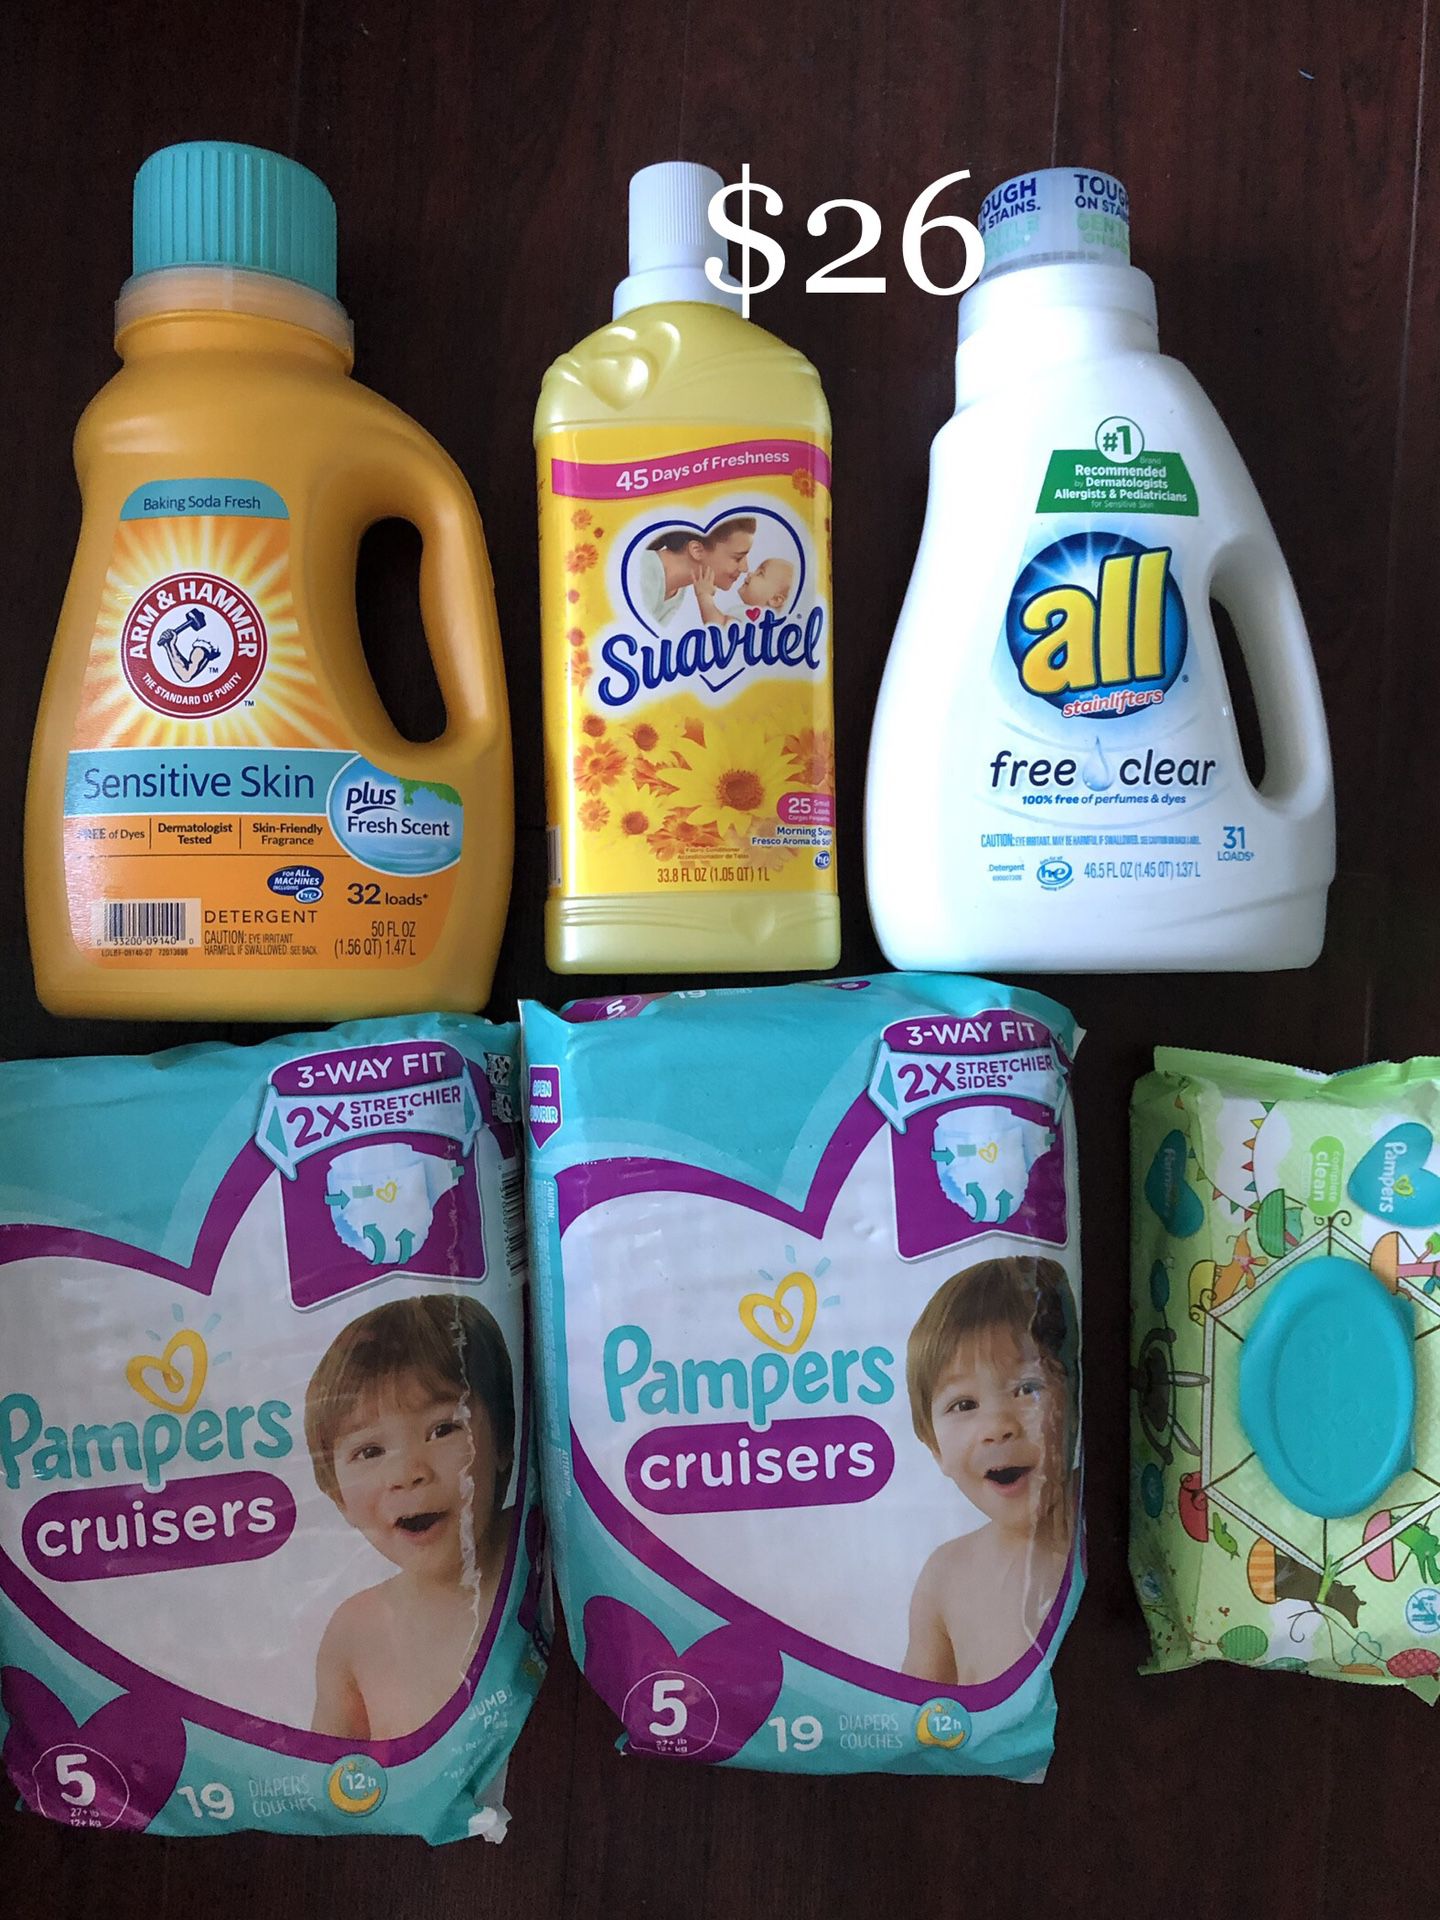 2 Pampers Diapers, 1 Baby Wipes, 1 Arm & Hammer & All Laundry Soap, 1 Suavitel Softener: 6 items $26